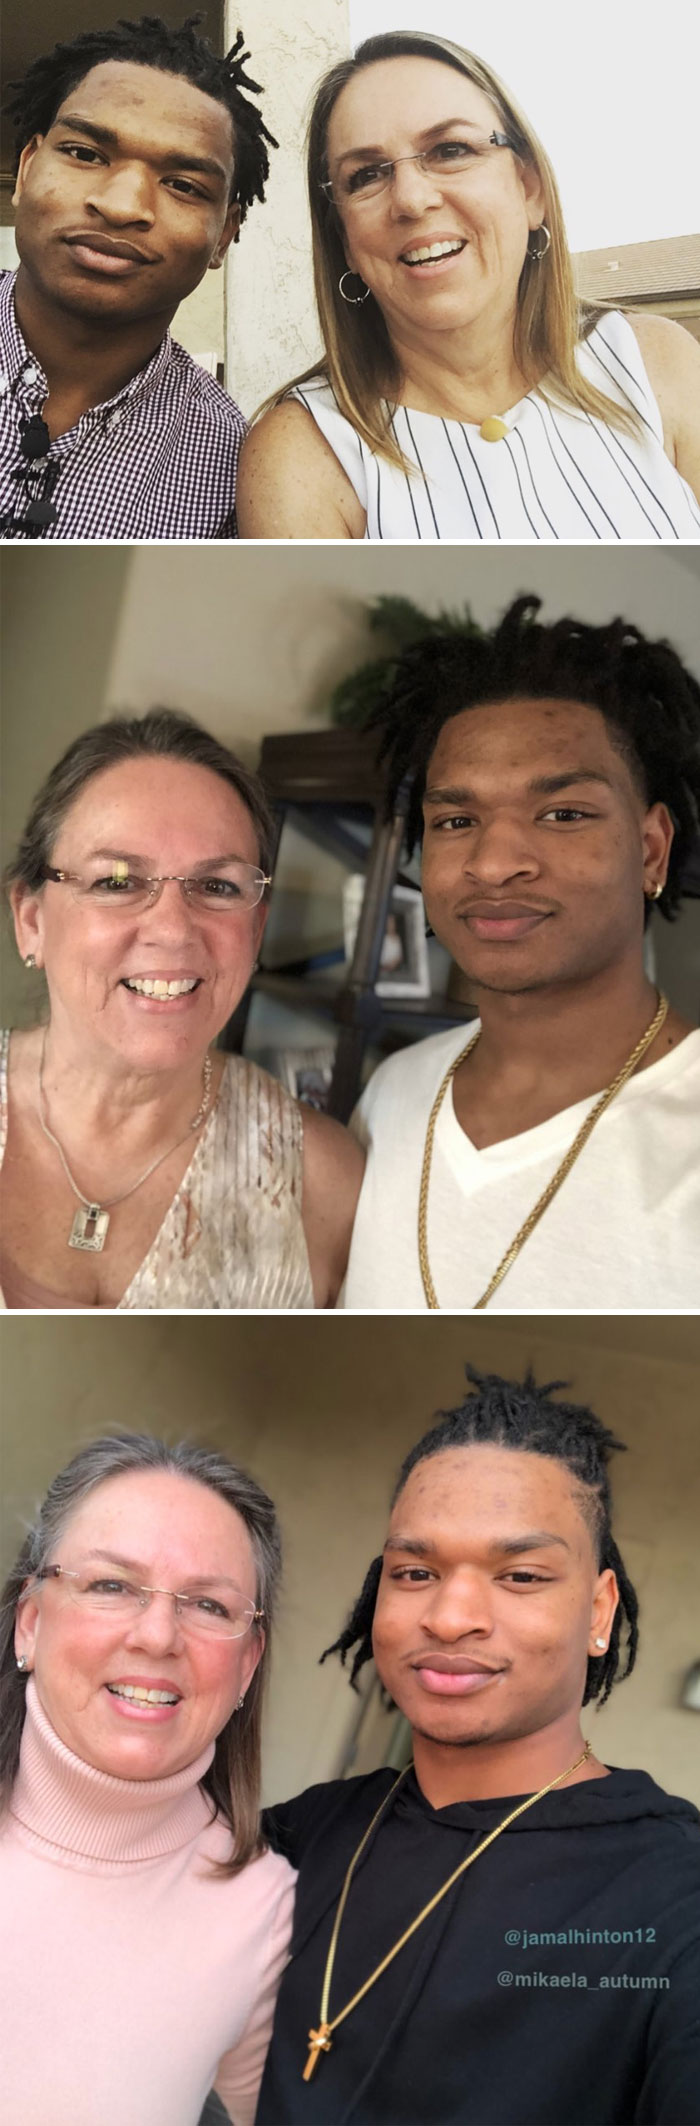 This Grandma Mistakenly Texted A Stranger Inviting Him For Thanksgiving. Now The Teen Is A Regular At Her Table